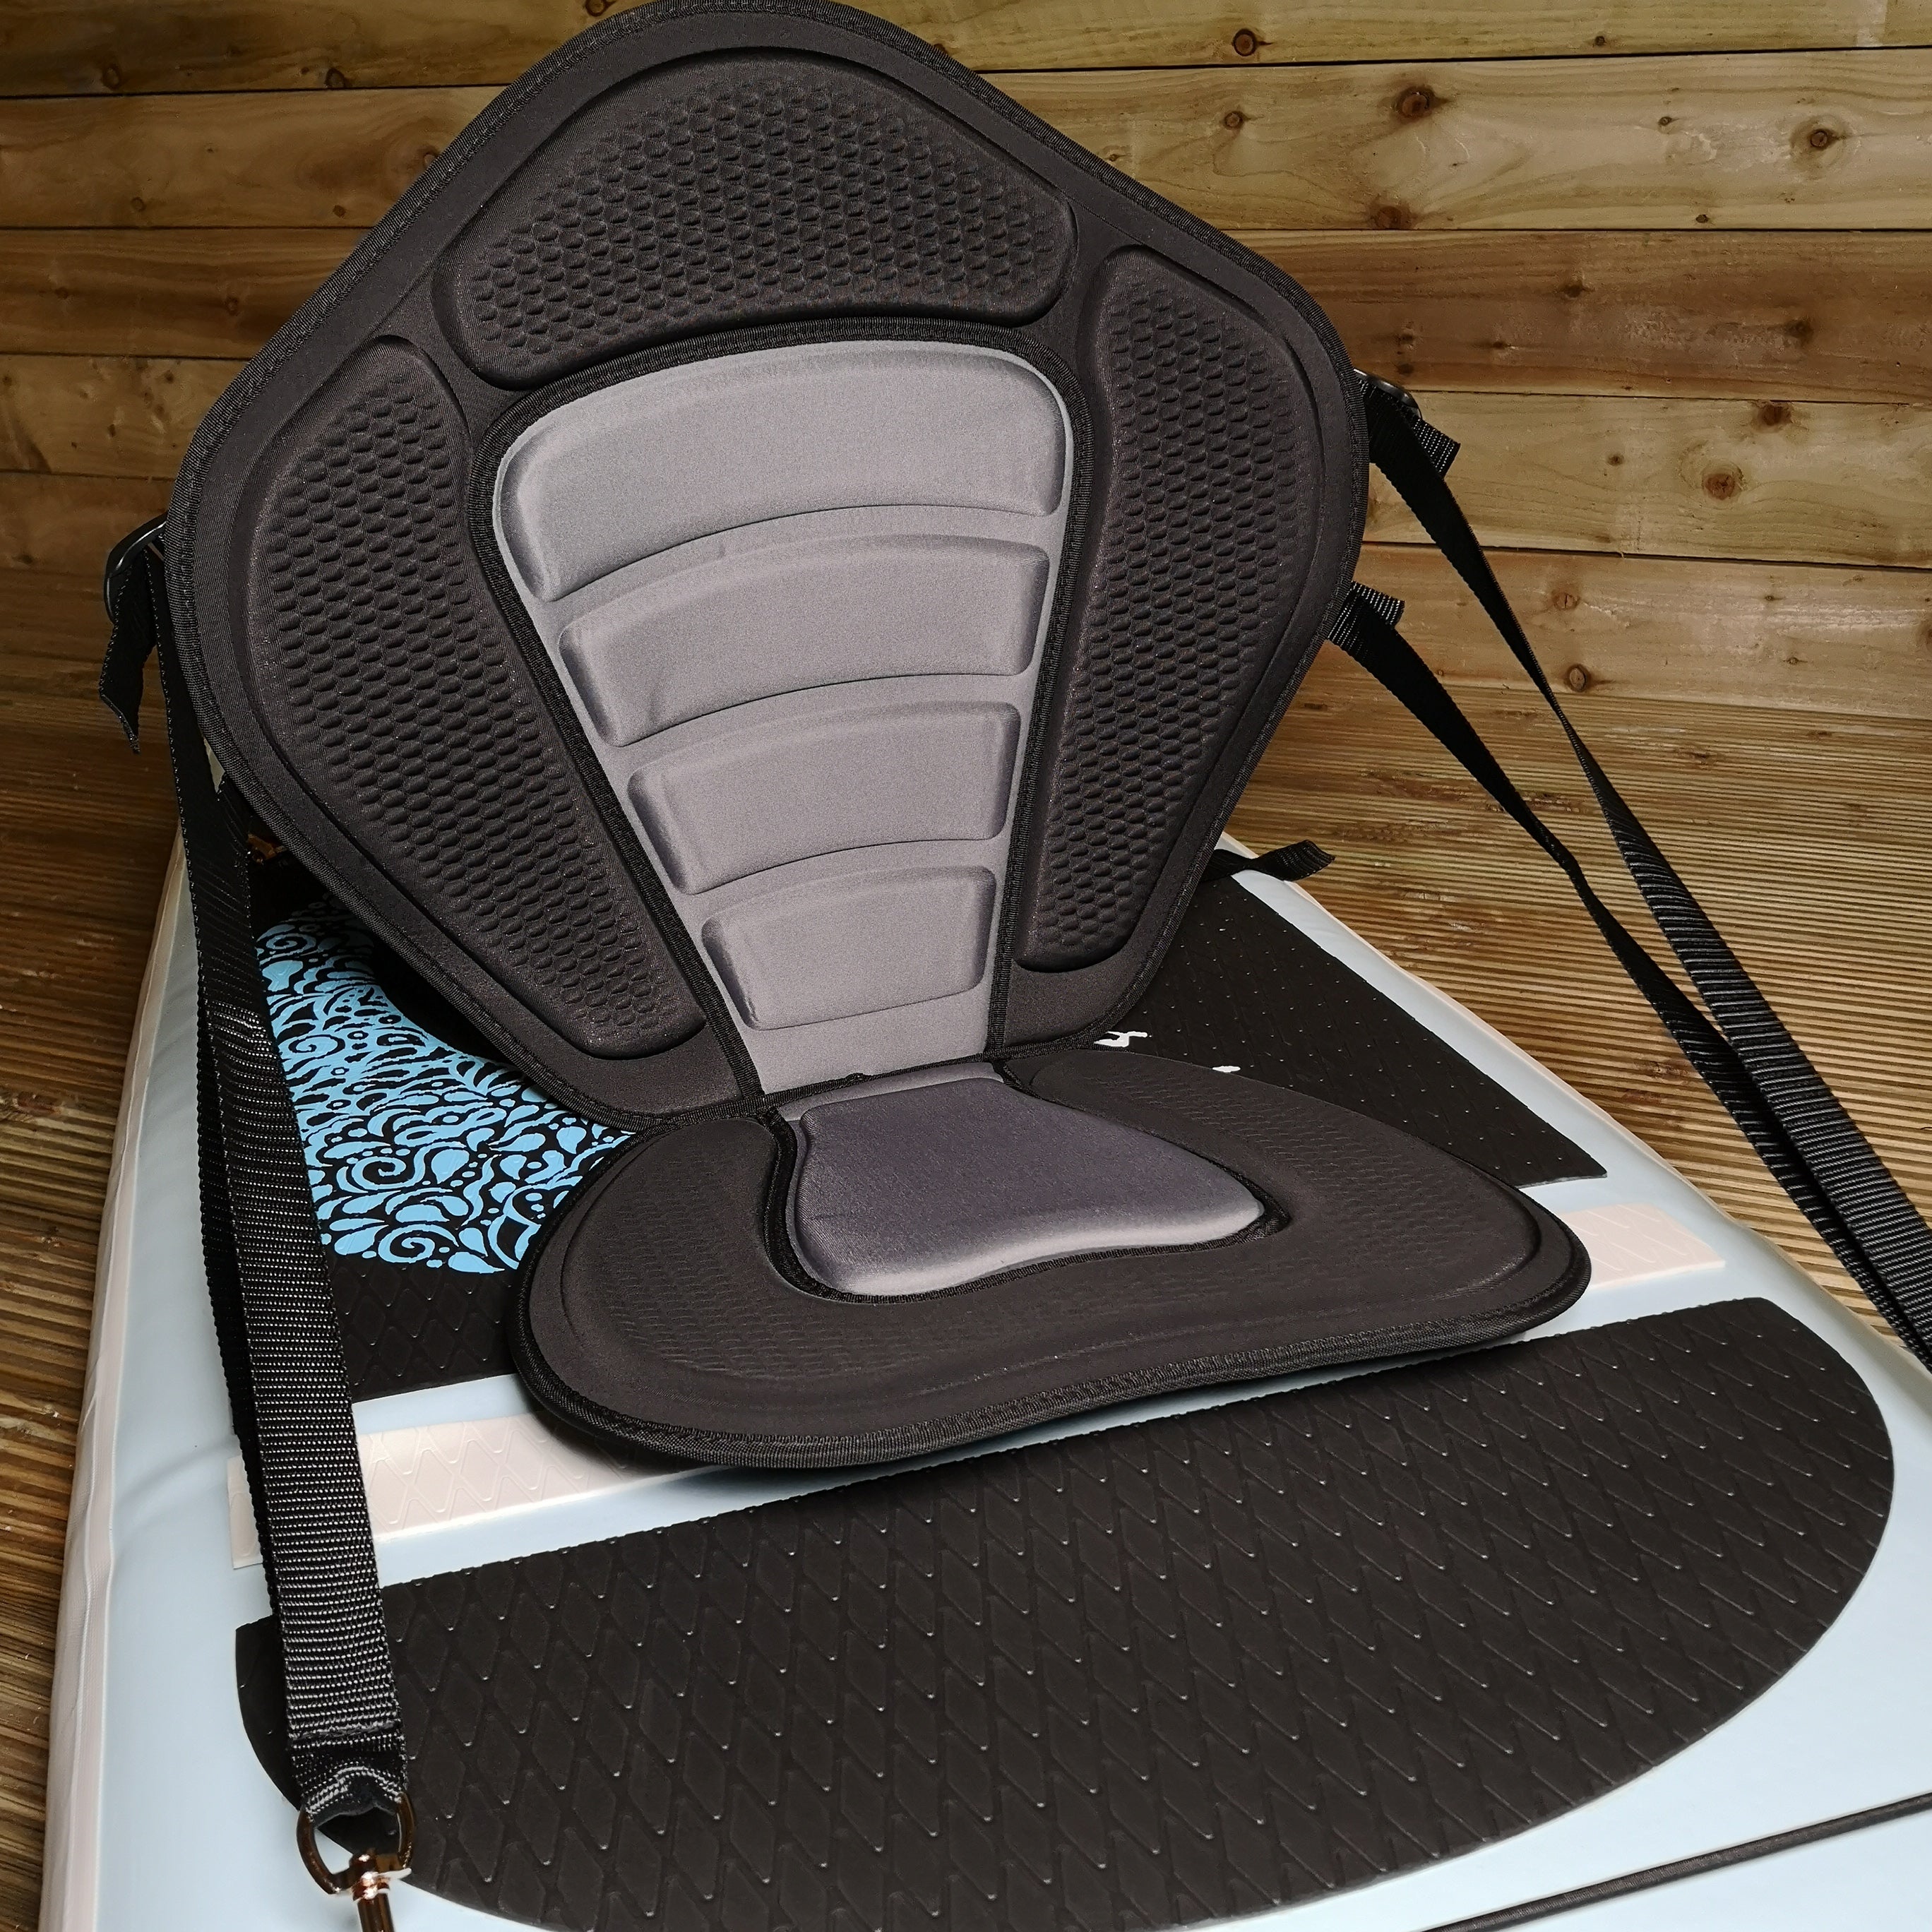 Foldable Deluxe SUP Chair with Storage Compartment for Stand Up Paddle Boards